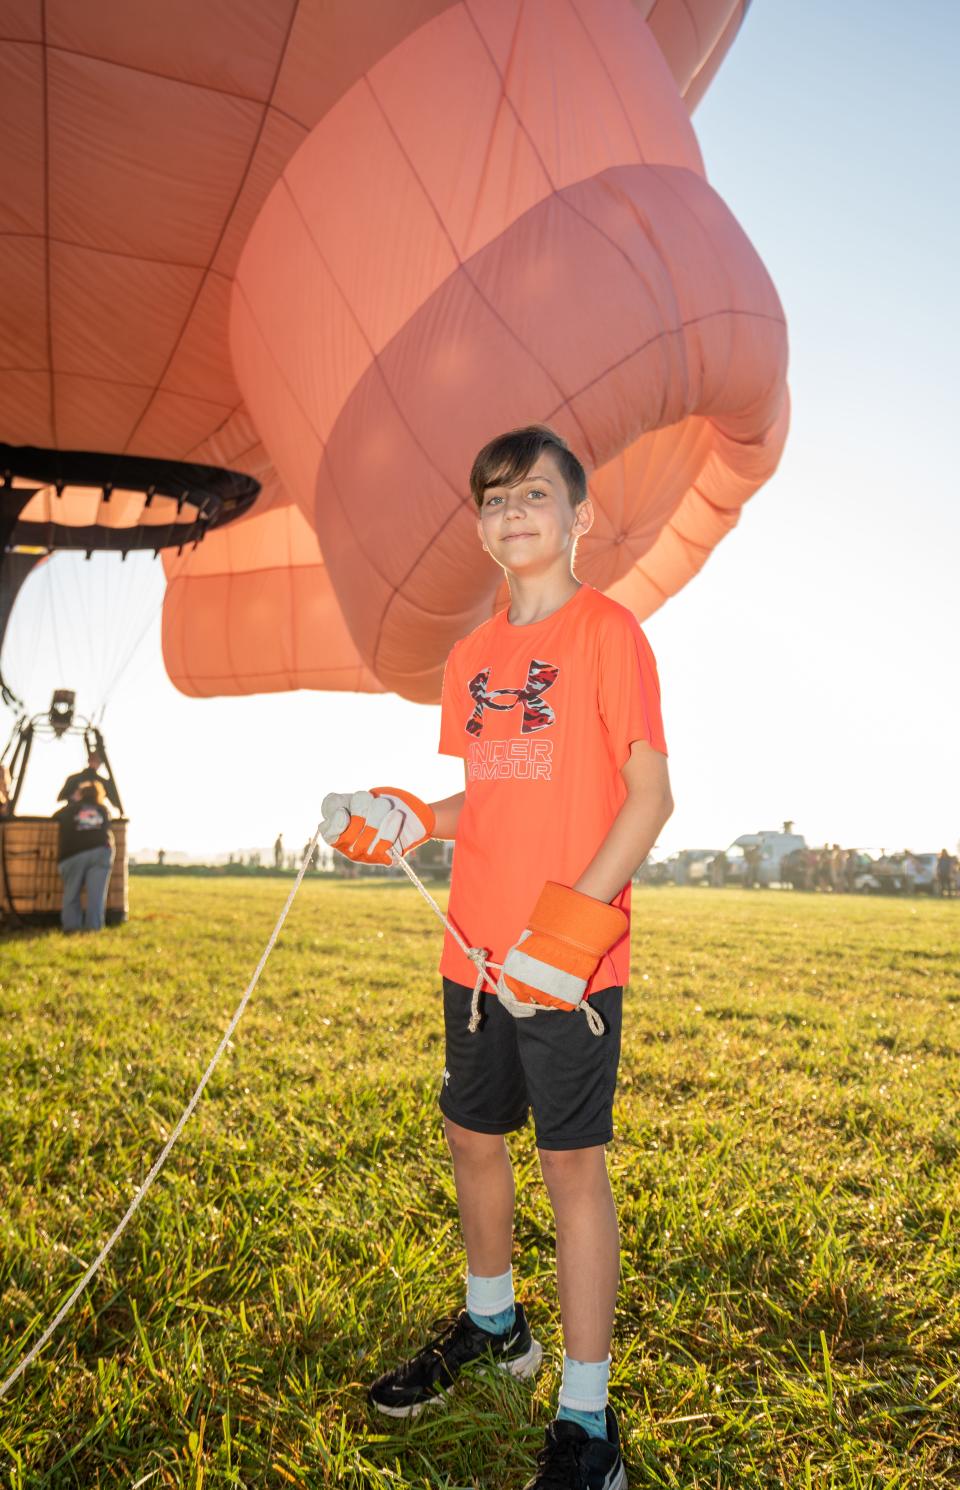 Hudson Frese, 11, of Three Bridges, at the 40th annual festival of ballooning at Solberg Airport in Readington.